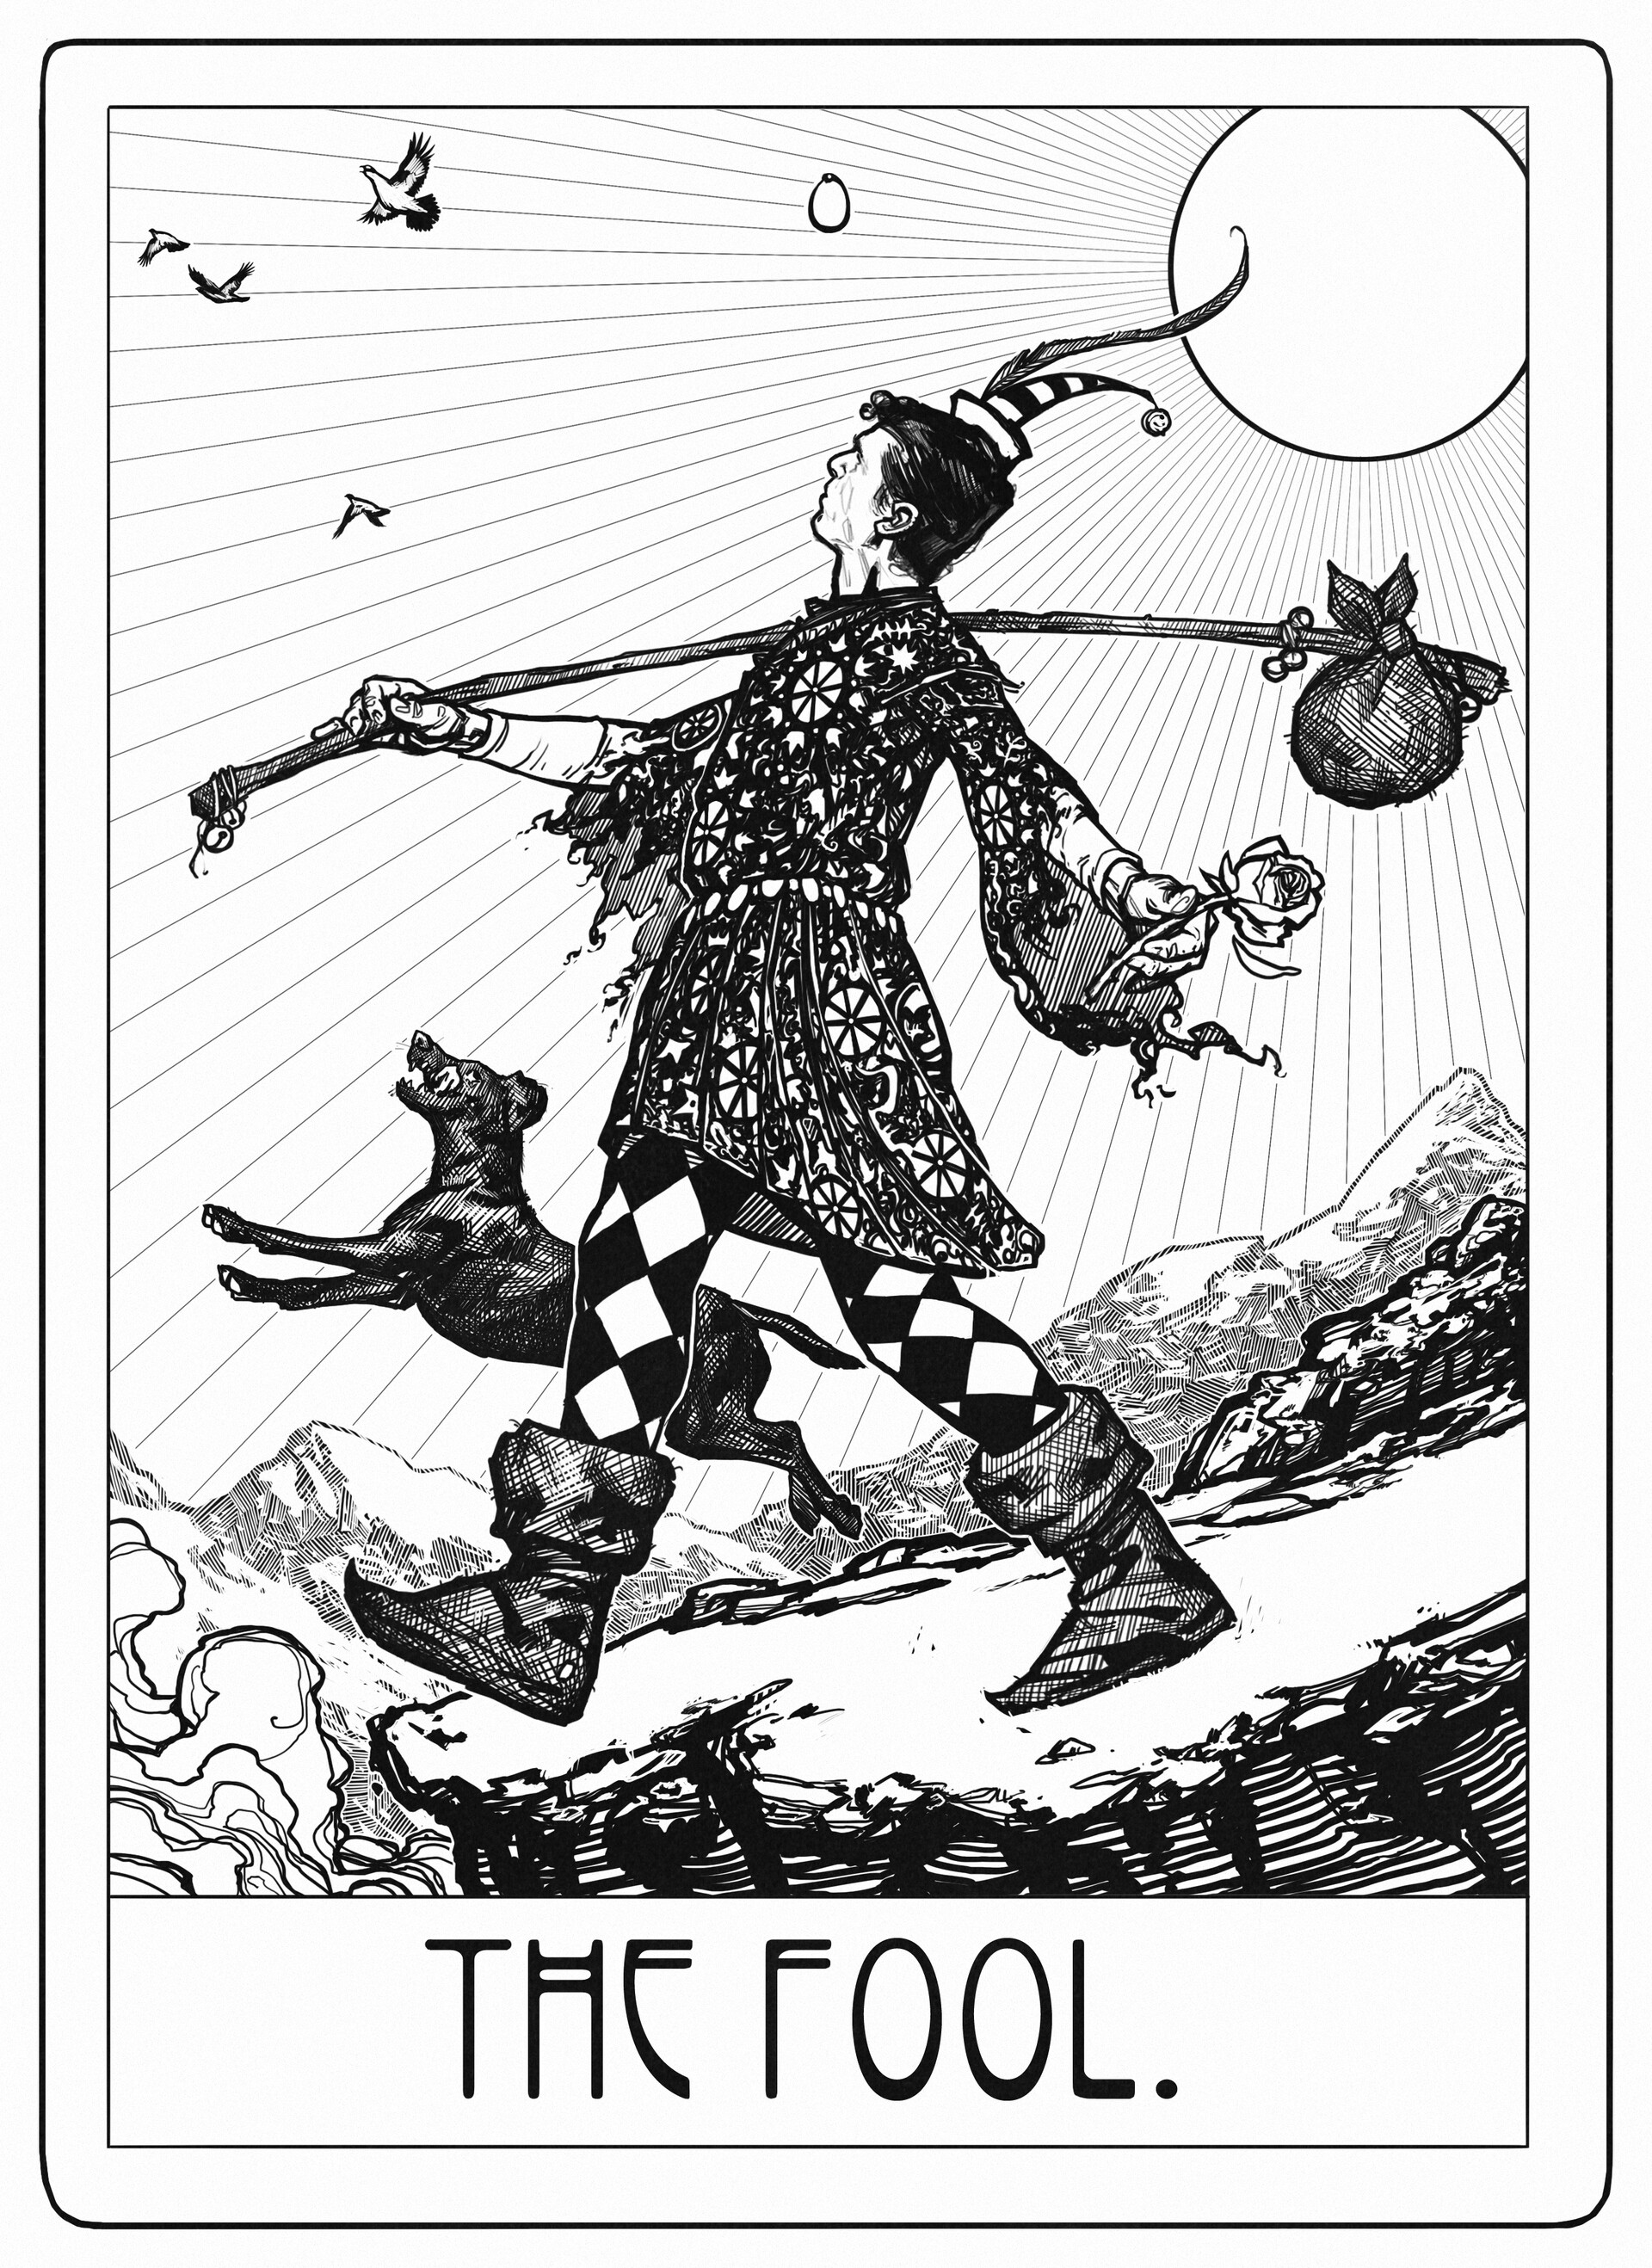 From Il Matto to the Fool in Tarot